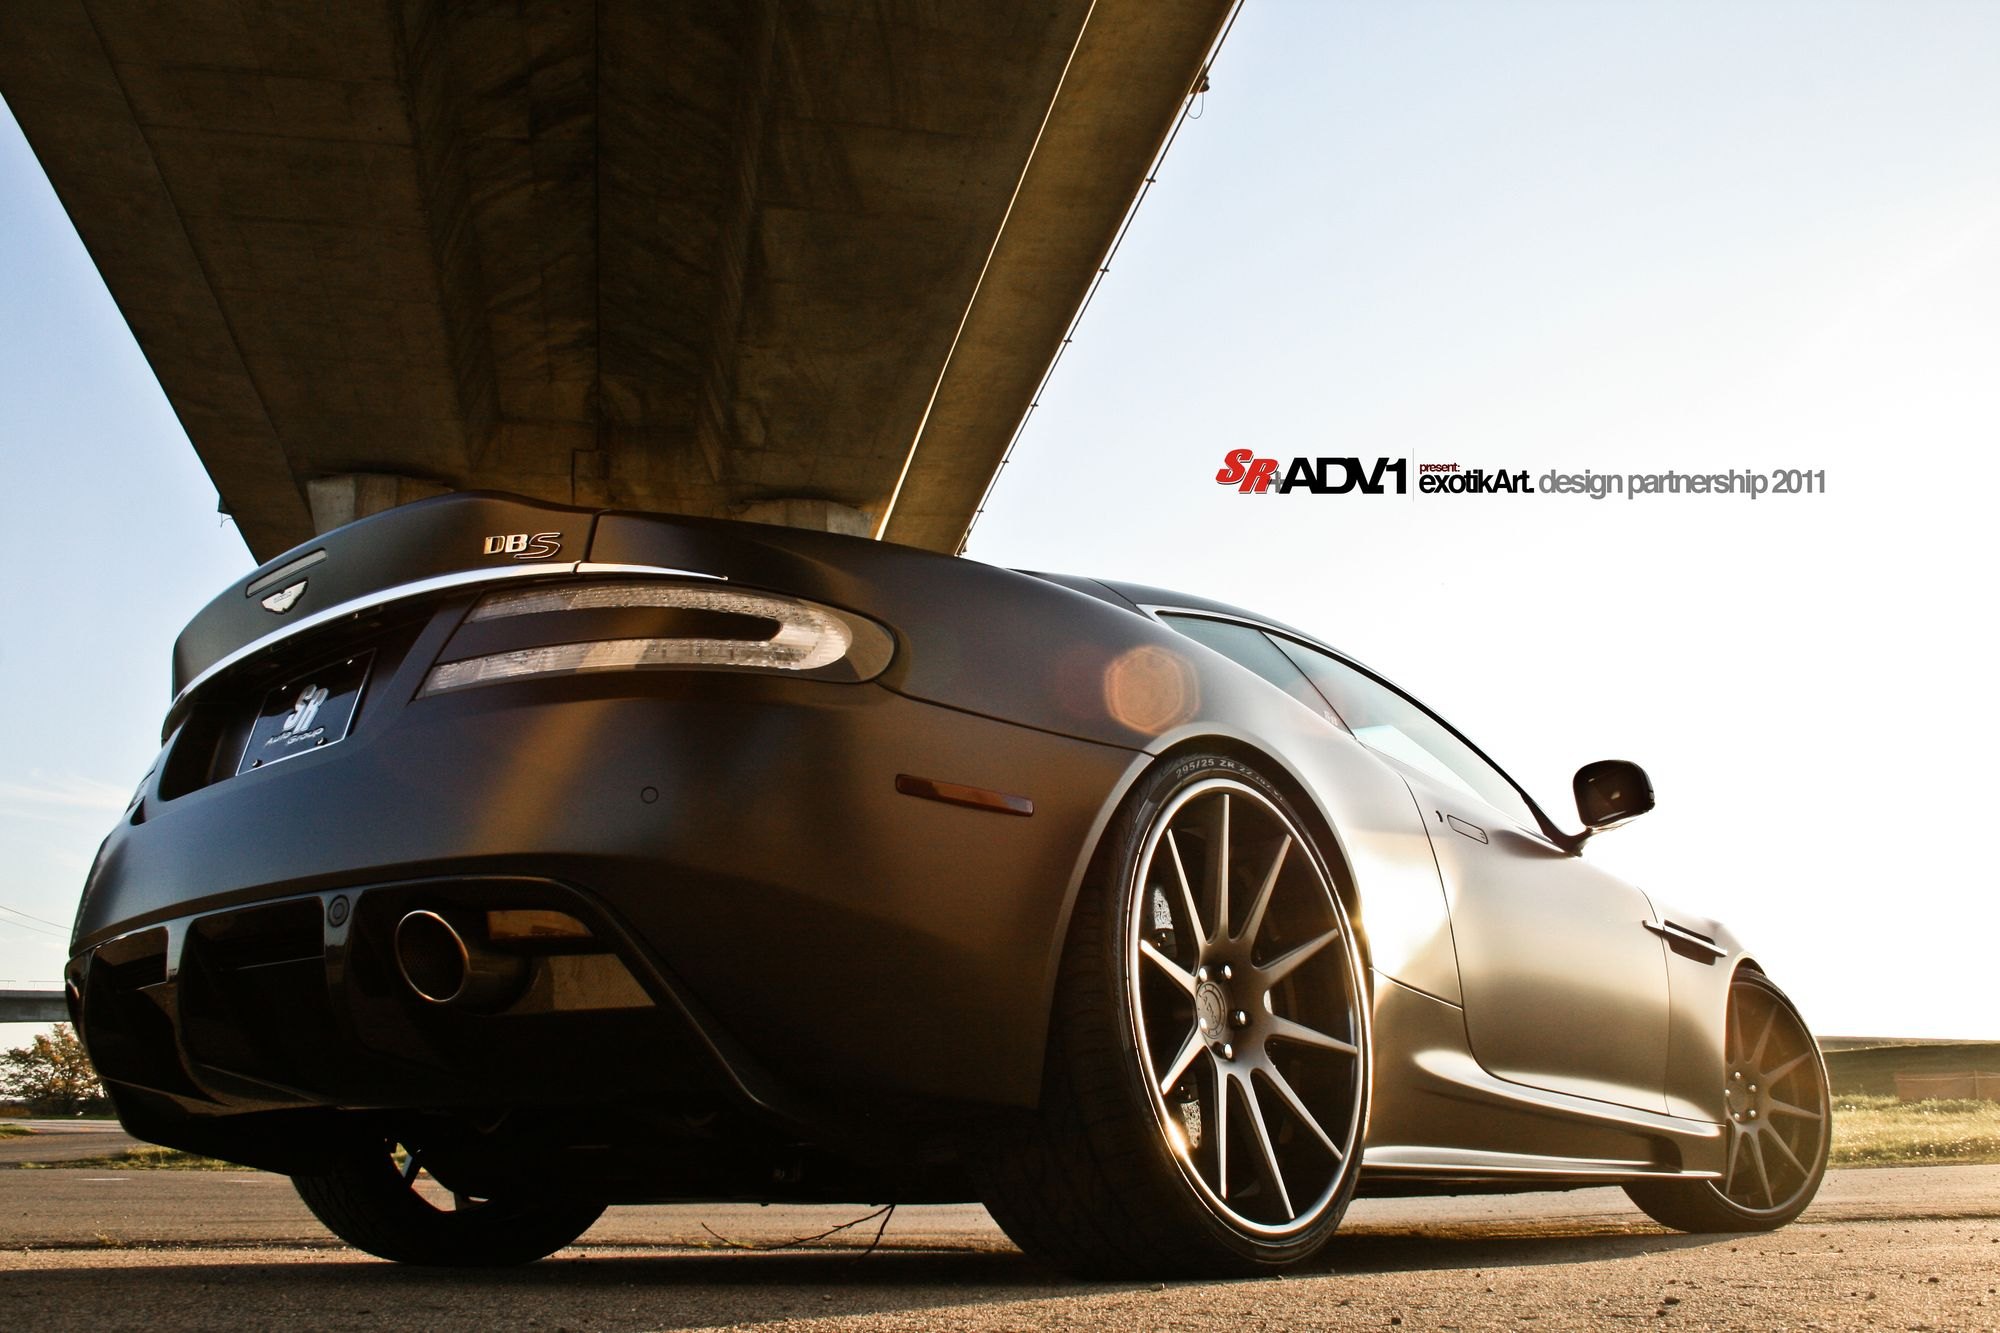 Aftermarket Rear Diffuser on Black Aston Martin DBS - Photo by ADV.1